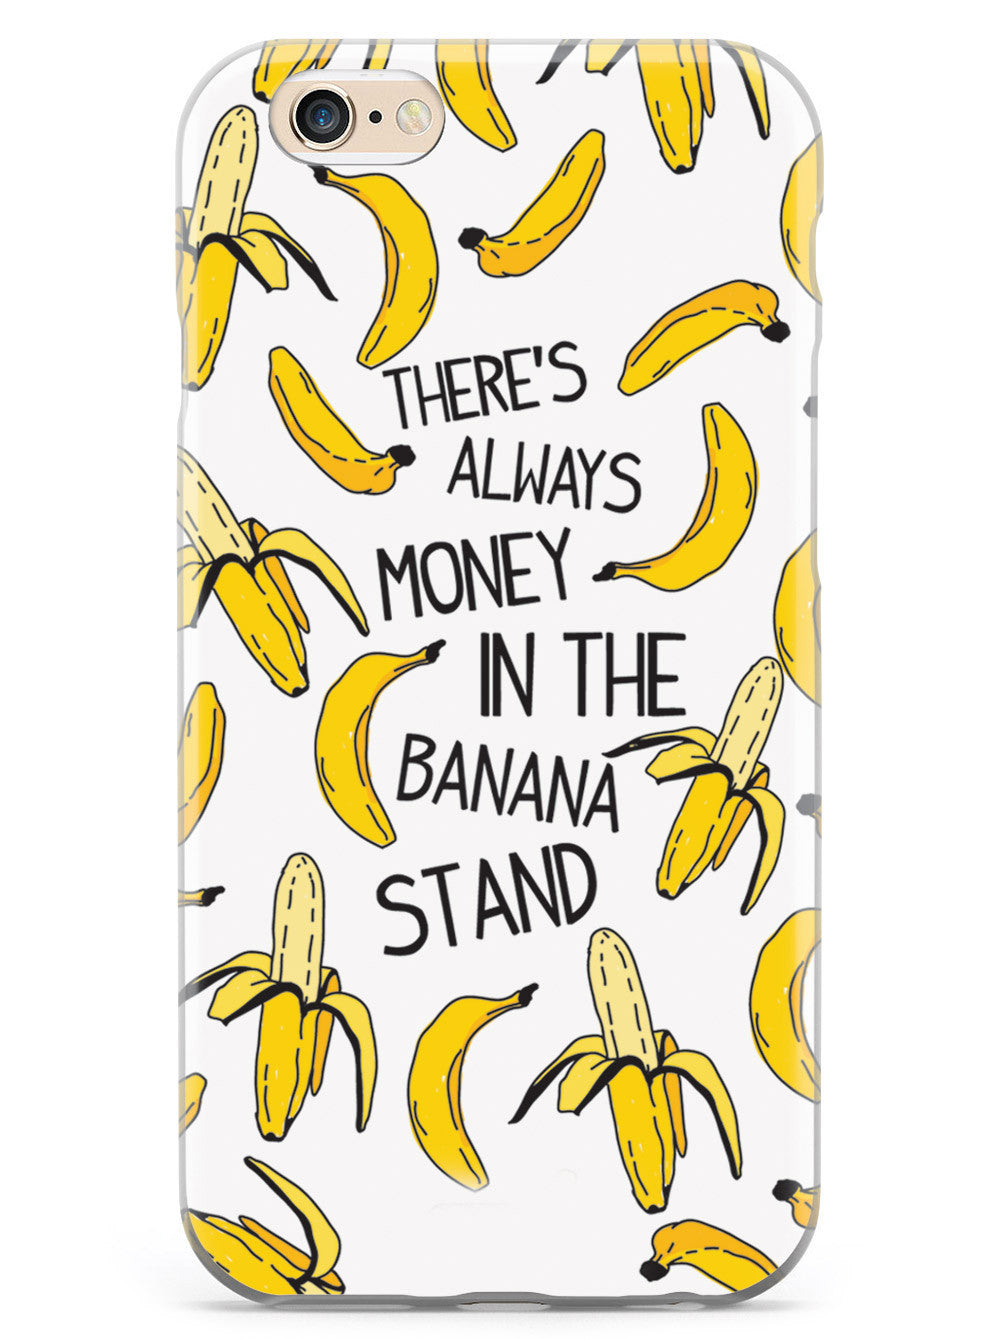 There's Always Money in the Banana Stand Case